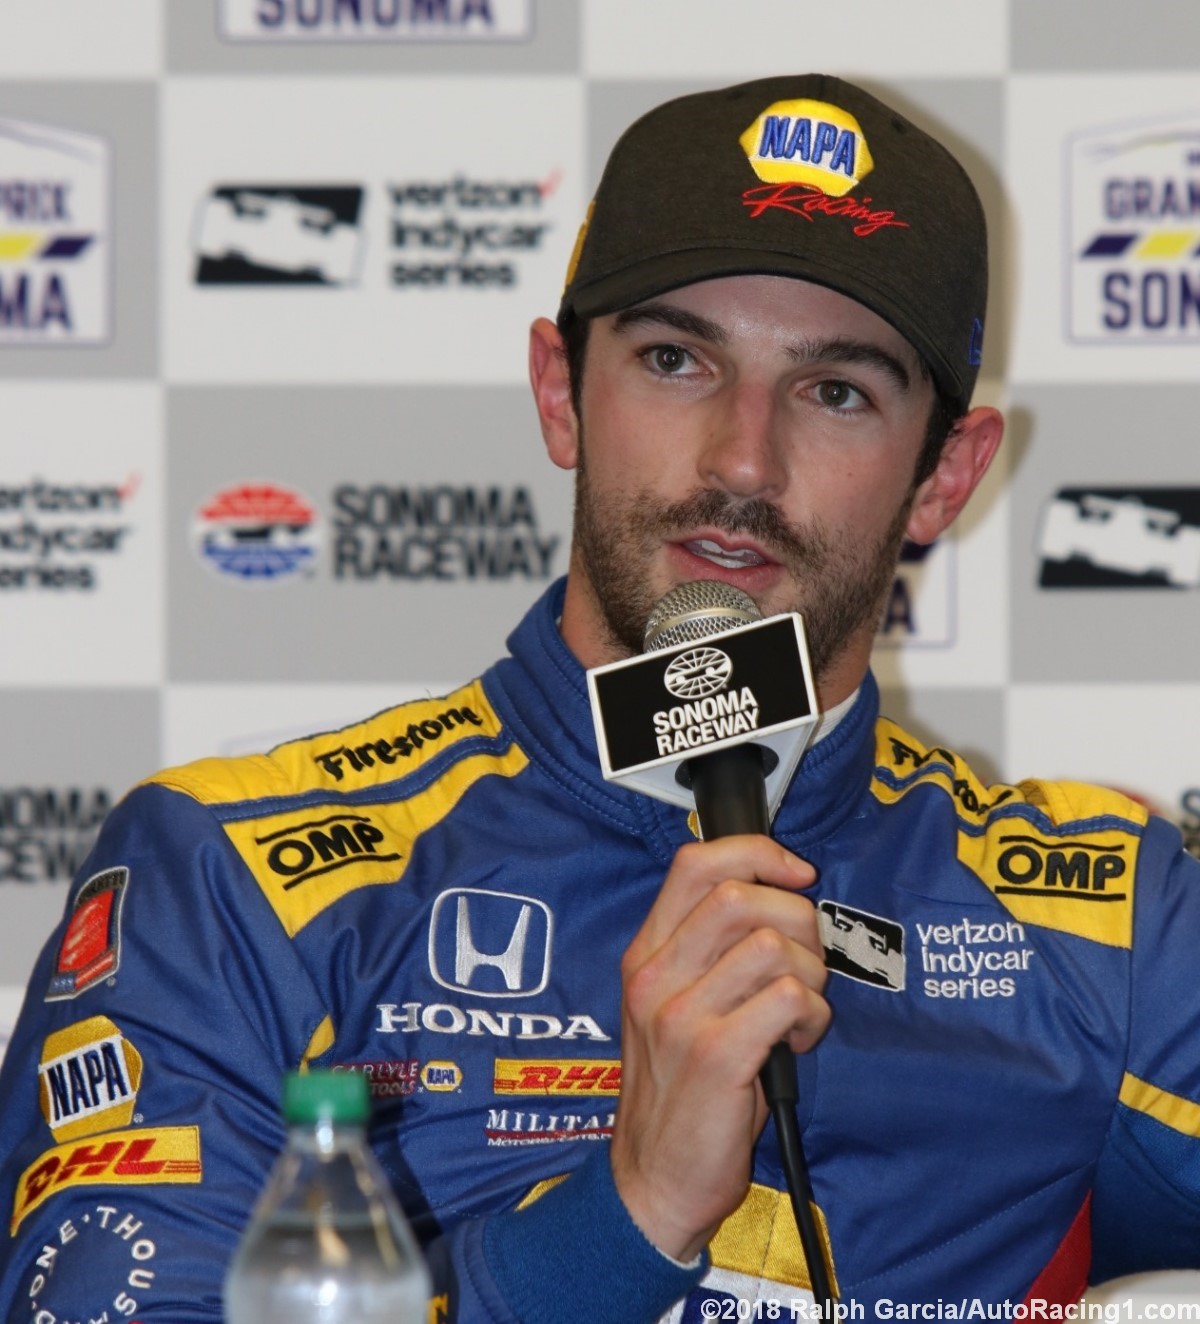 A disappointed Alexander Rossi